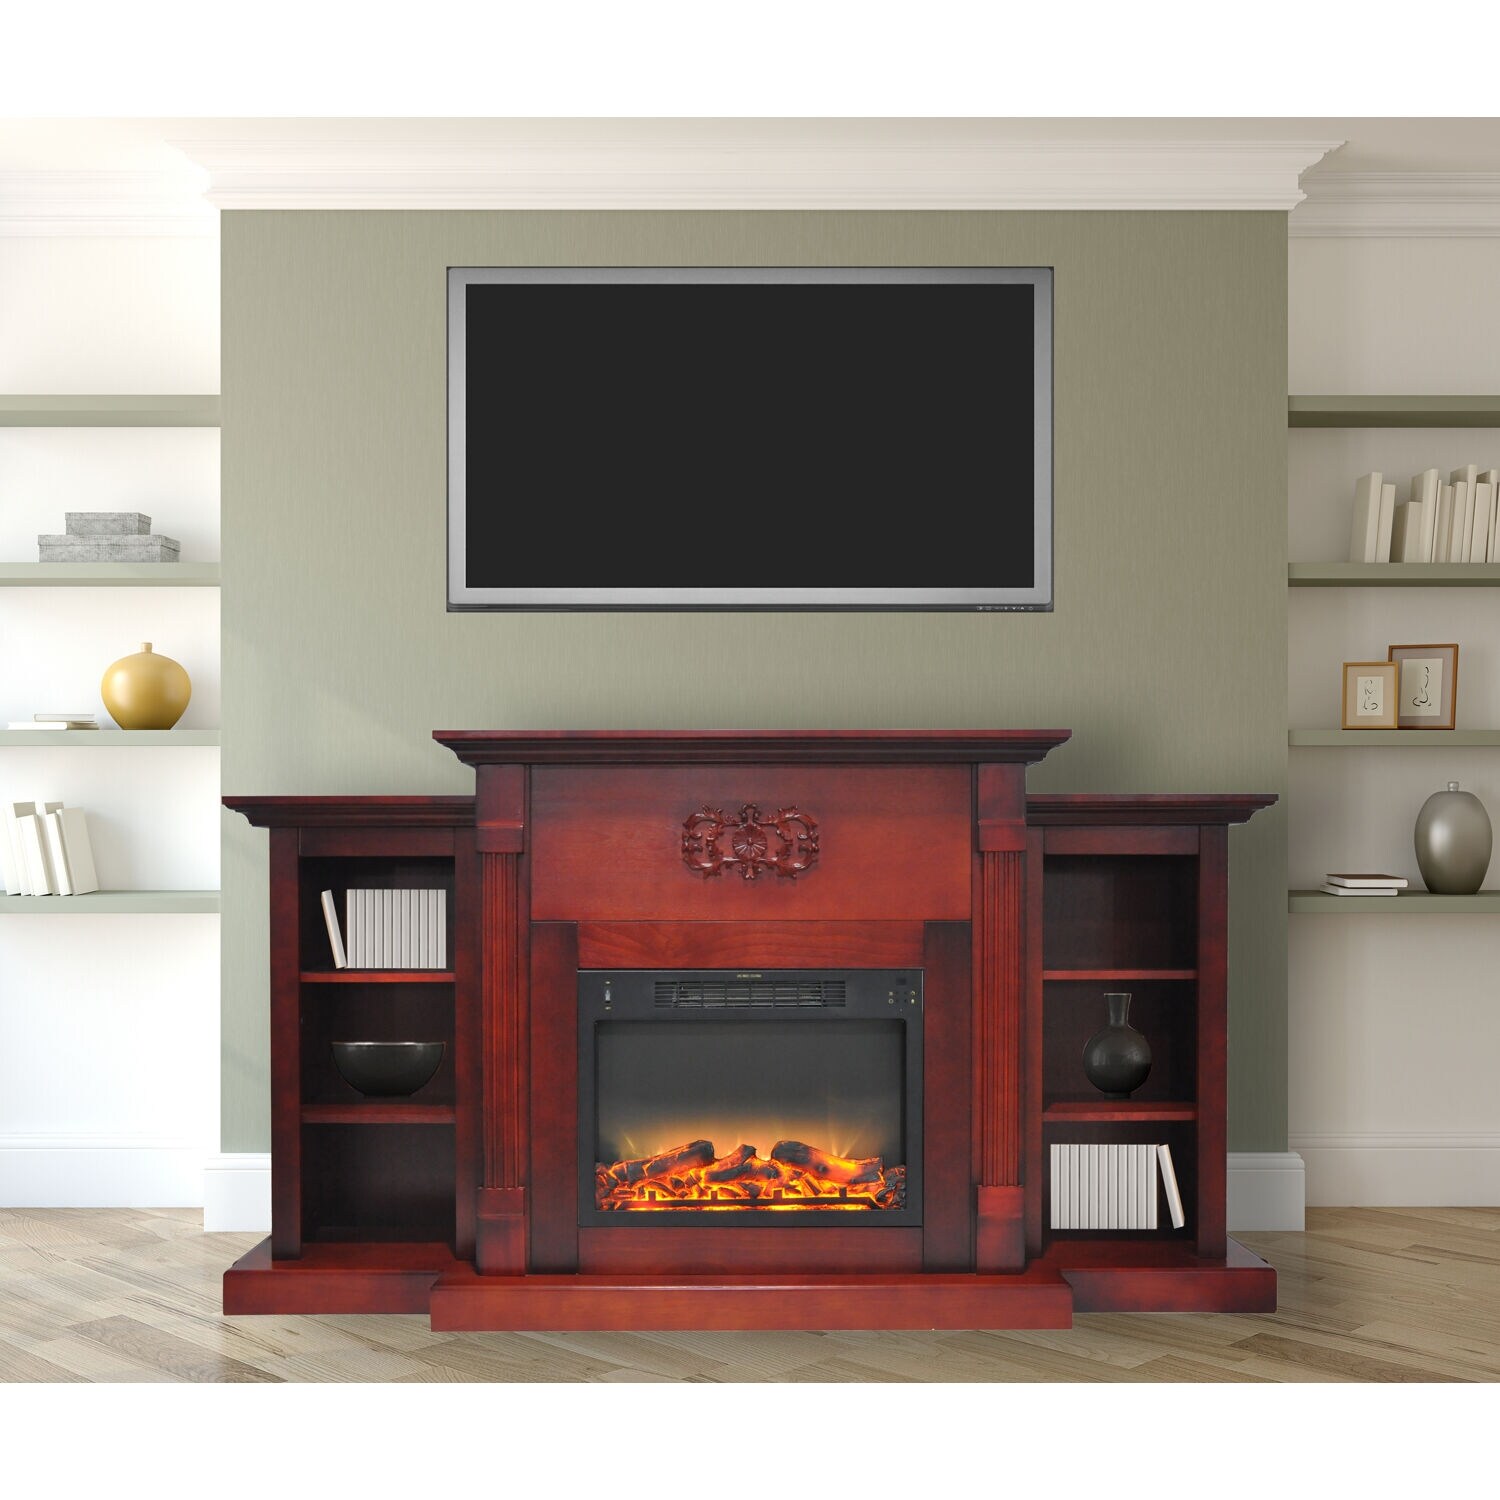 Hanover Classic 72 In. Electric Fireplace in Cherry with Bookshelves and Enhanced Log Display